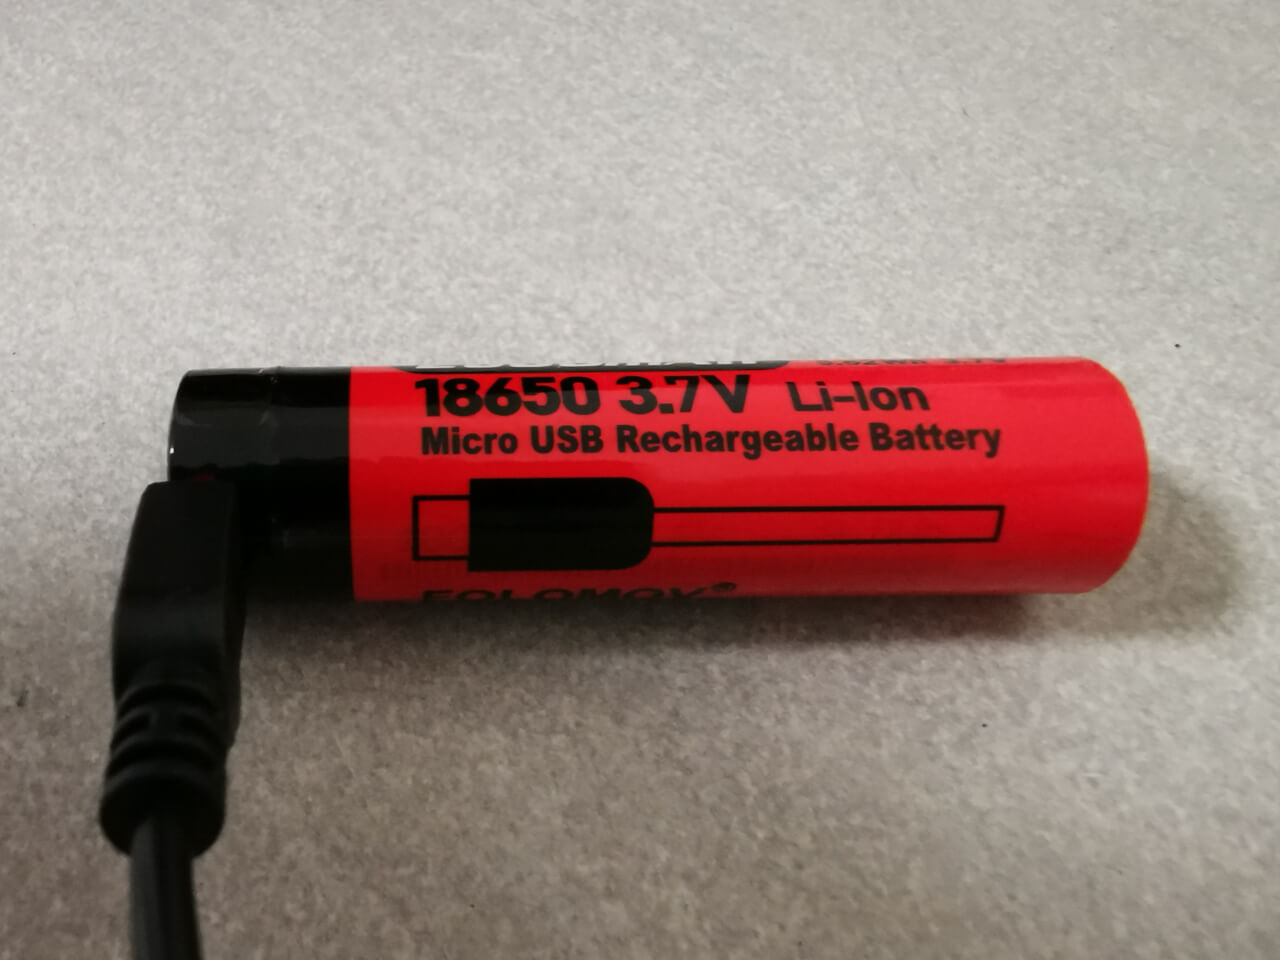 USB Rechargeable 18650 Battery